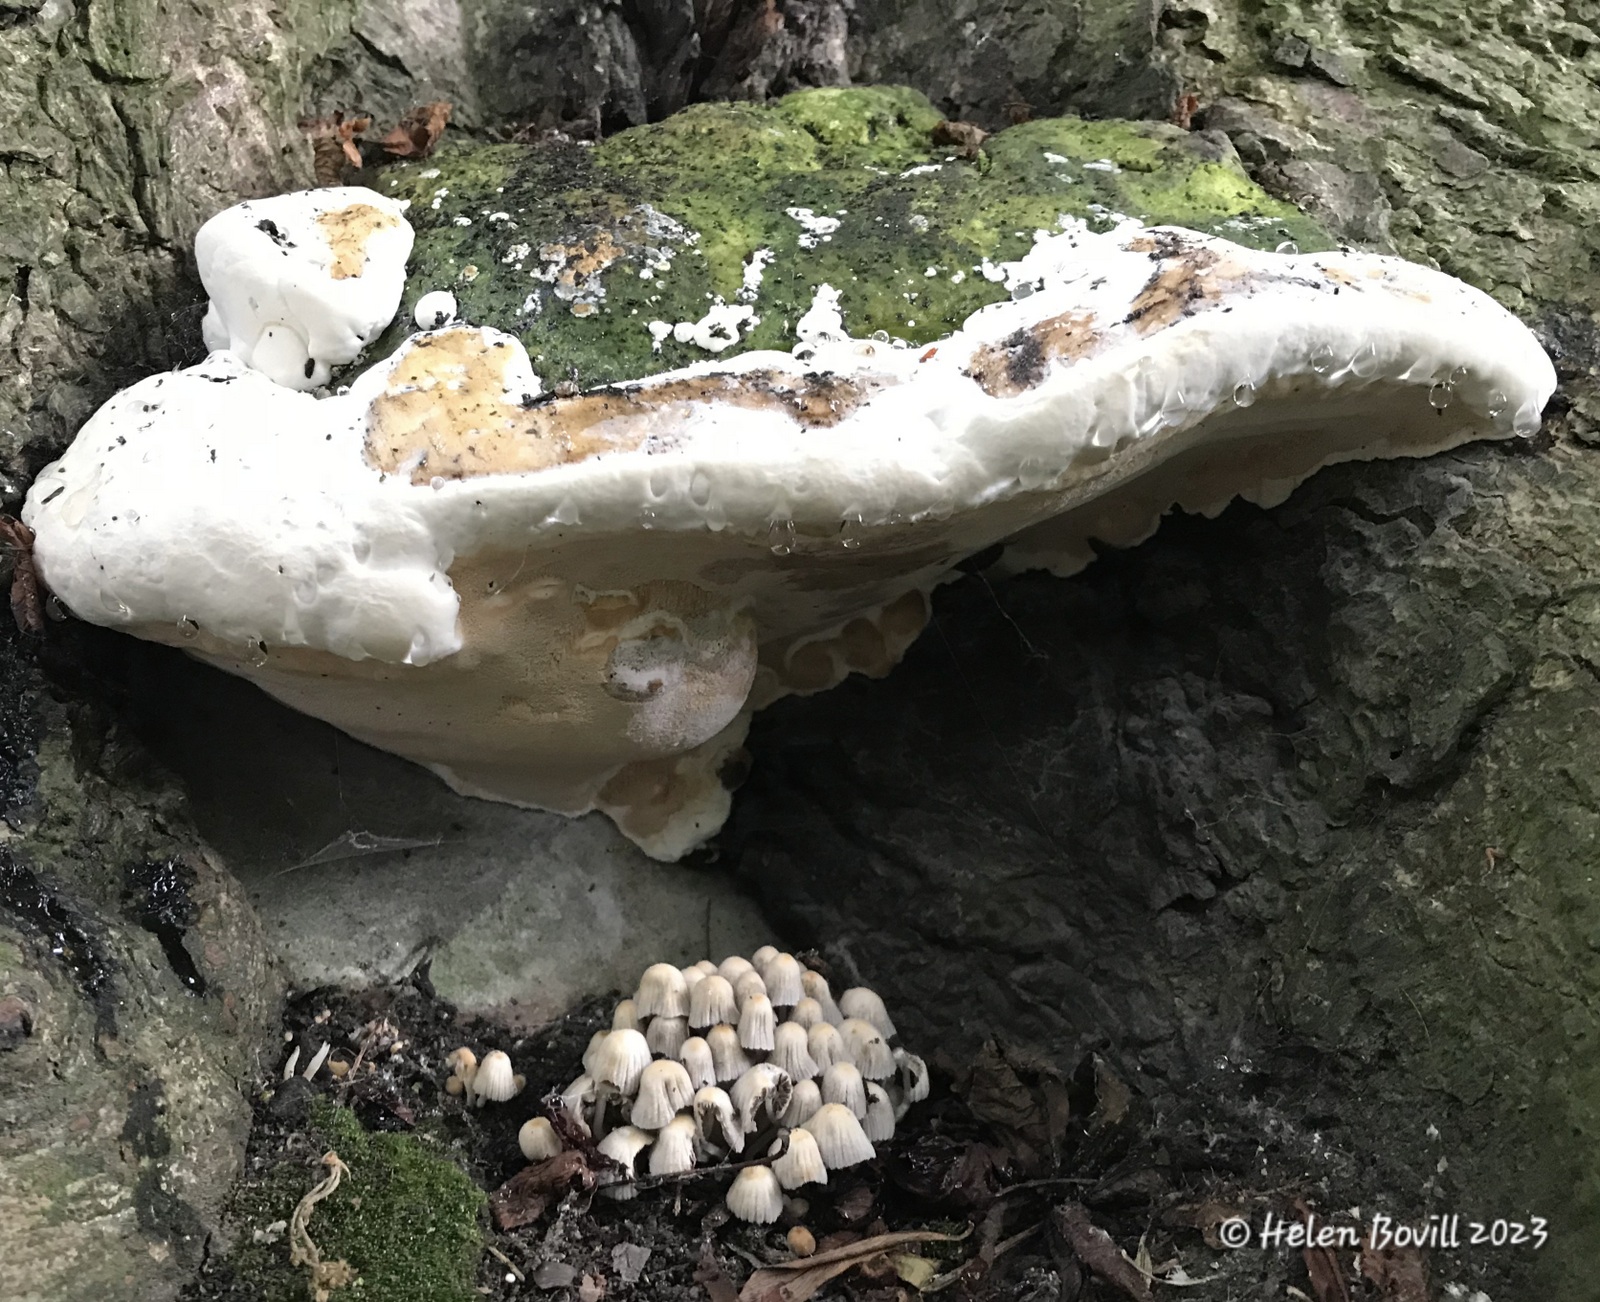 A large bracket fungus attached to a tree,  with some smaller Fairy Inkcap mushrooms growing underneath it - food for the cemetery wildlife